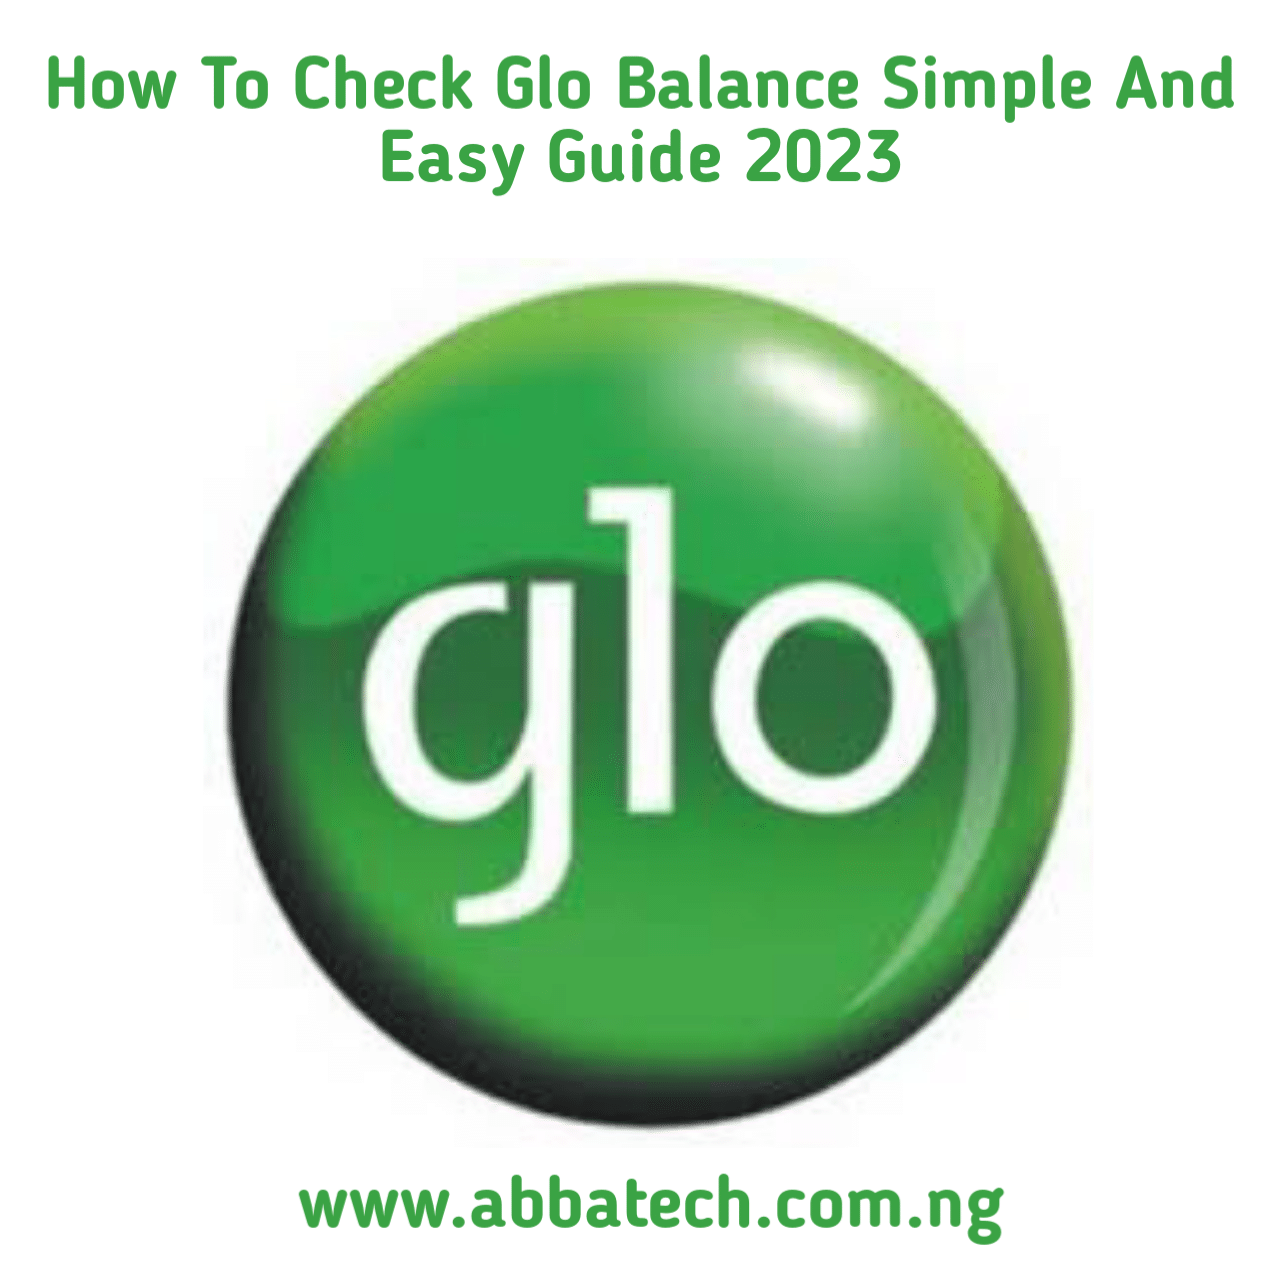 How To Check Glo Balance, Simple And Easy Guide 2023